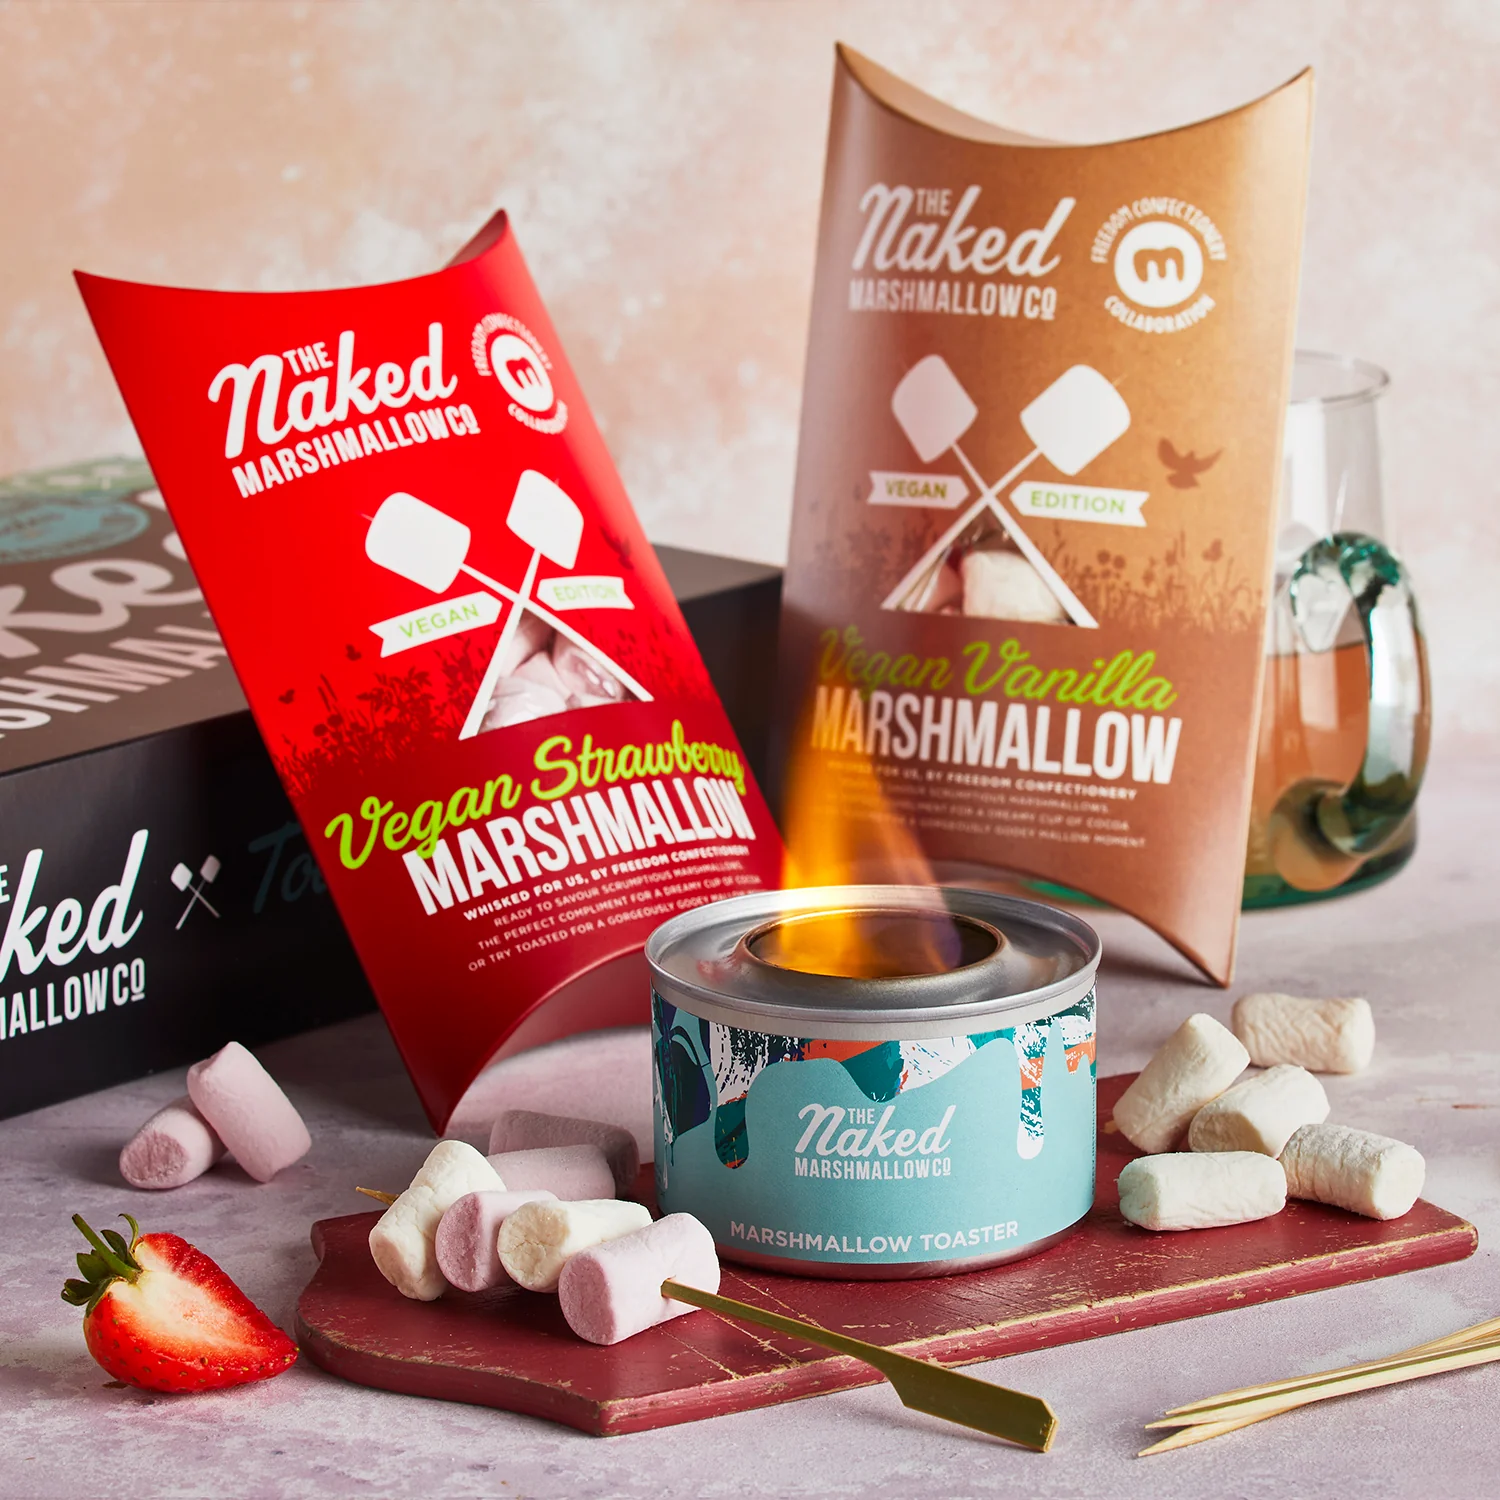 The Naked Marshmallow Gluten Free Gifts for the Coeliac in your life